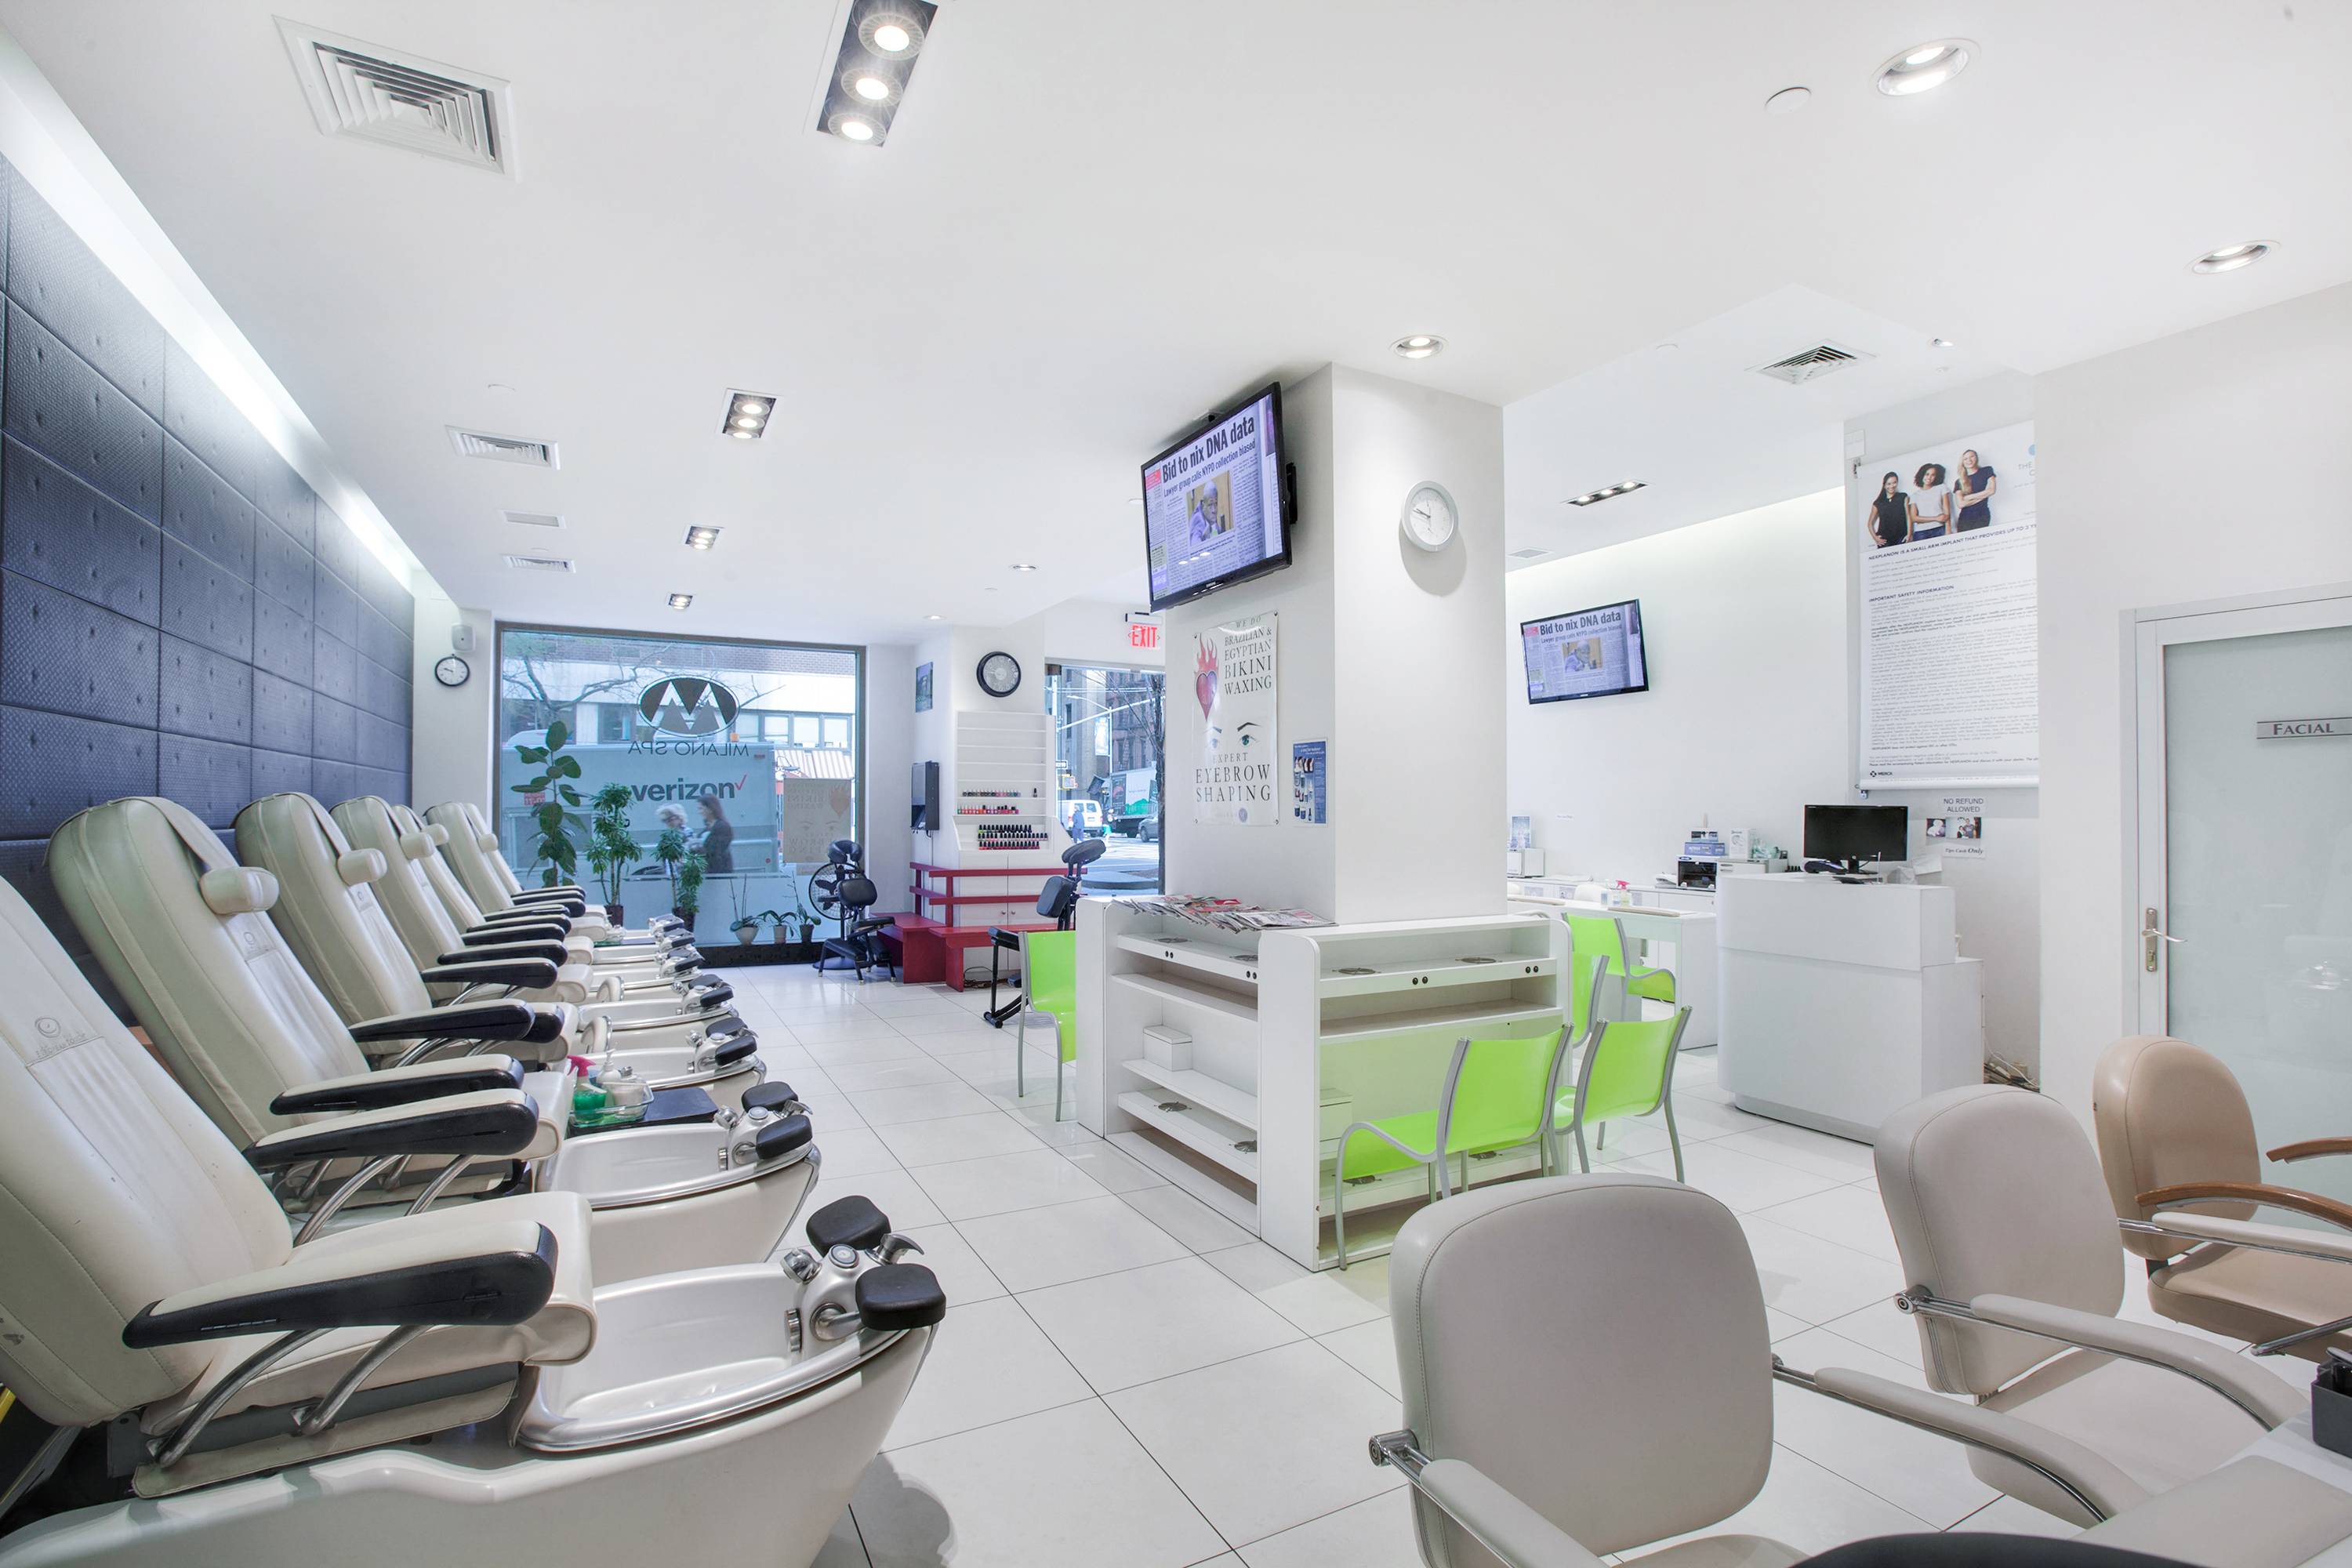 Stunning Luxury Nail Salon and Spa Short Term Business for Sale -Motivated Seller